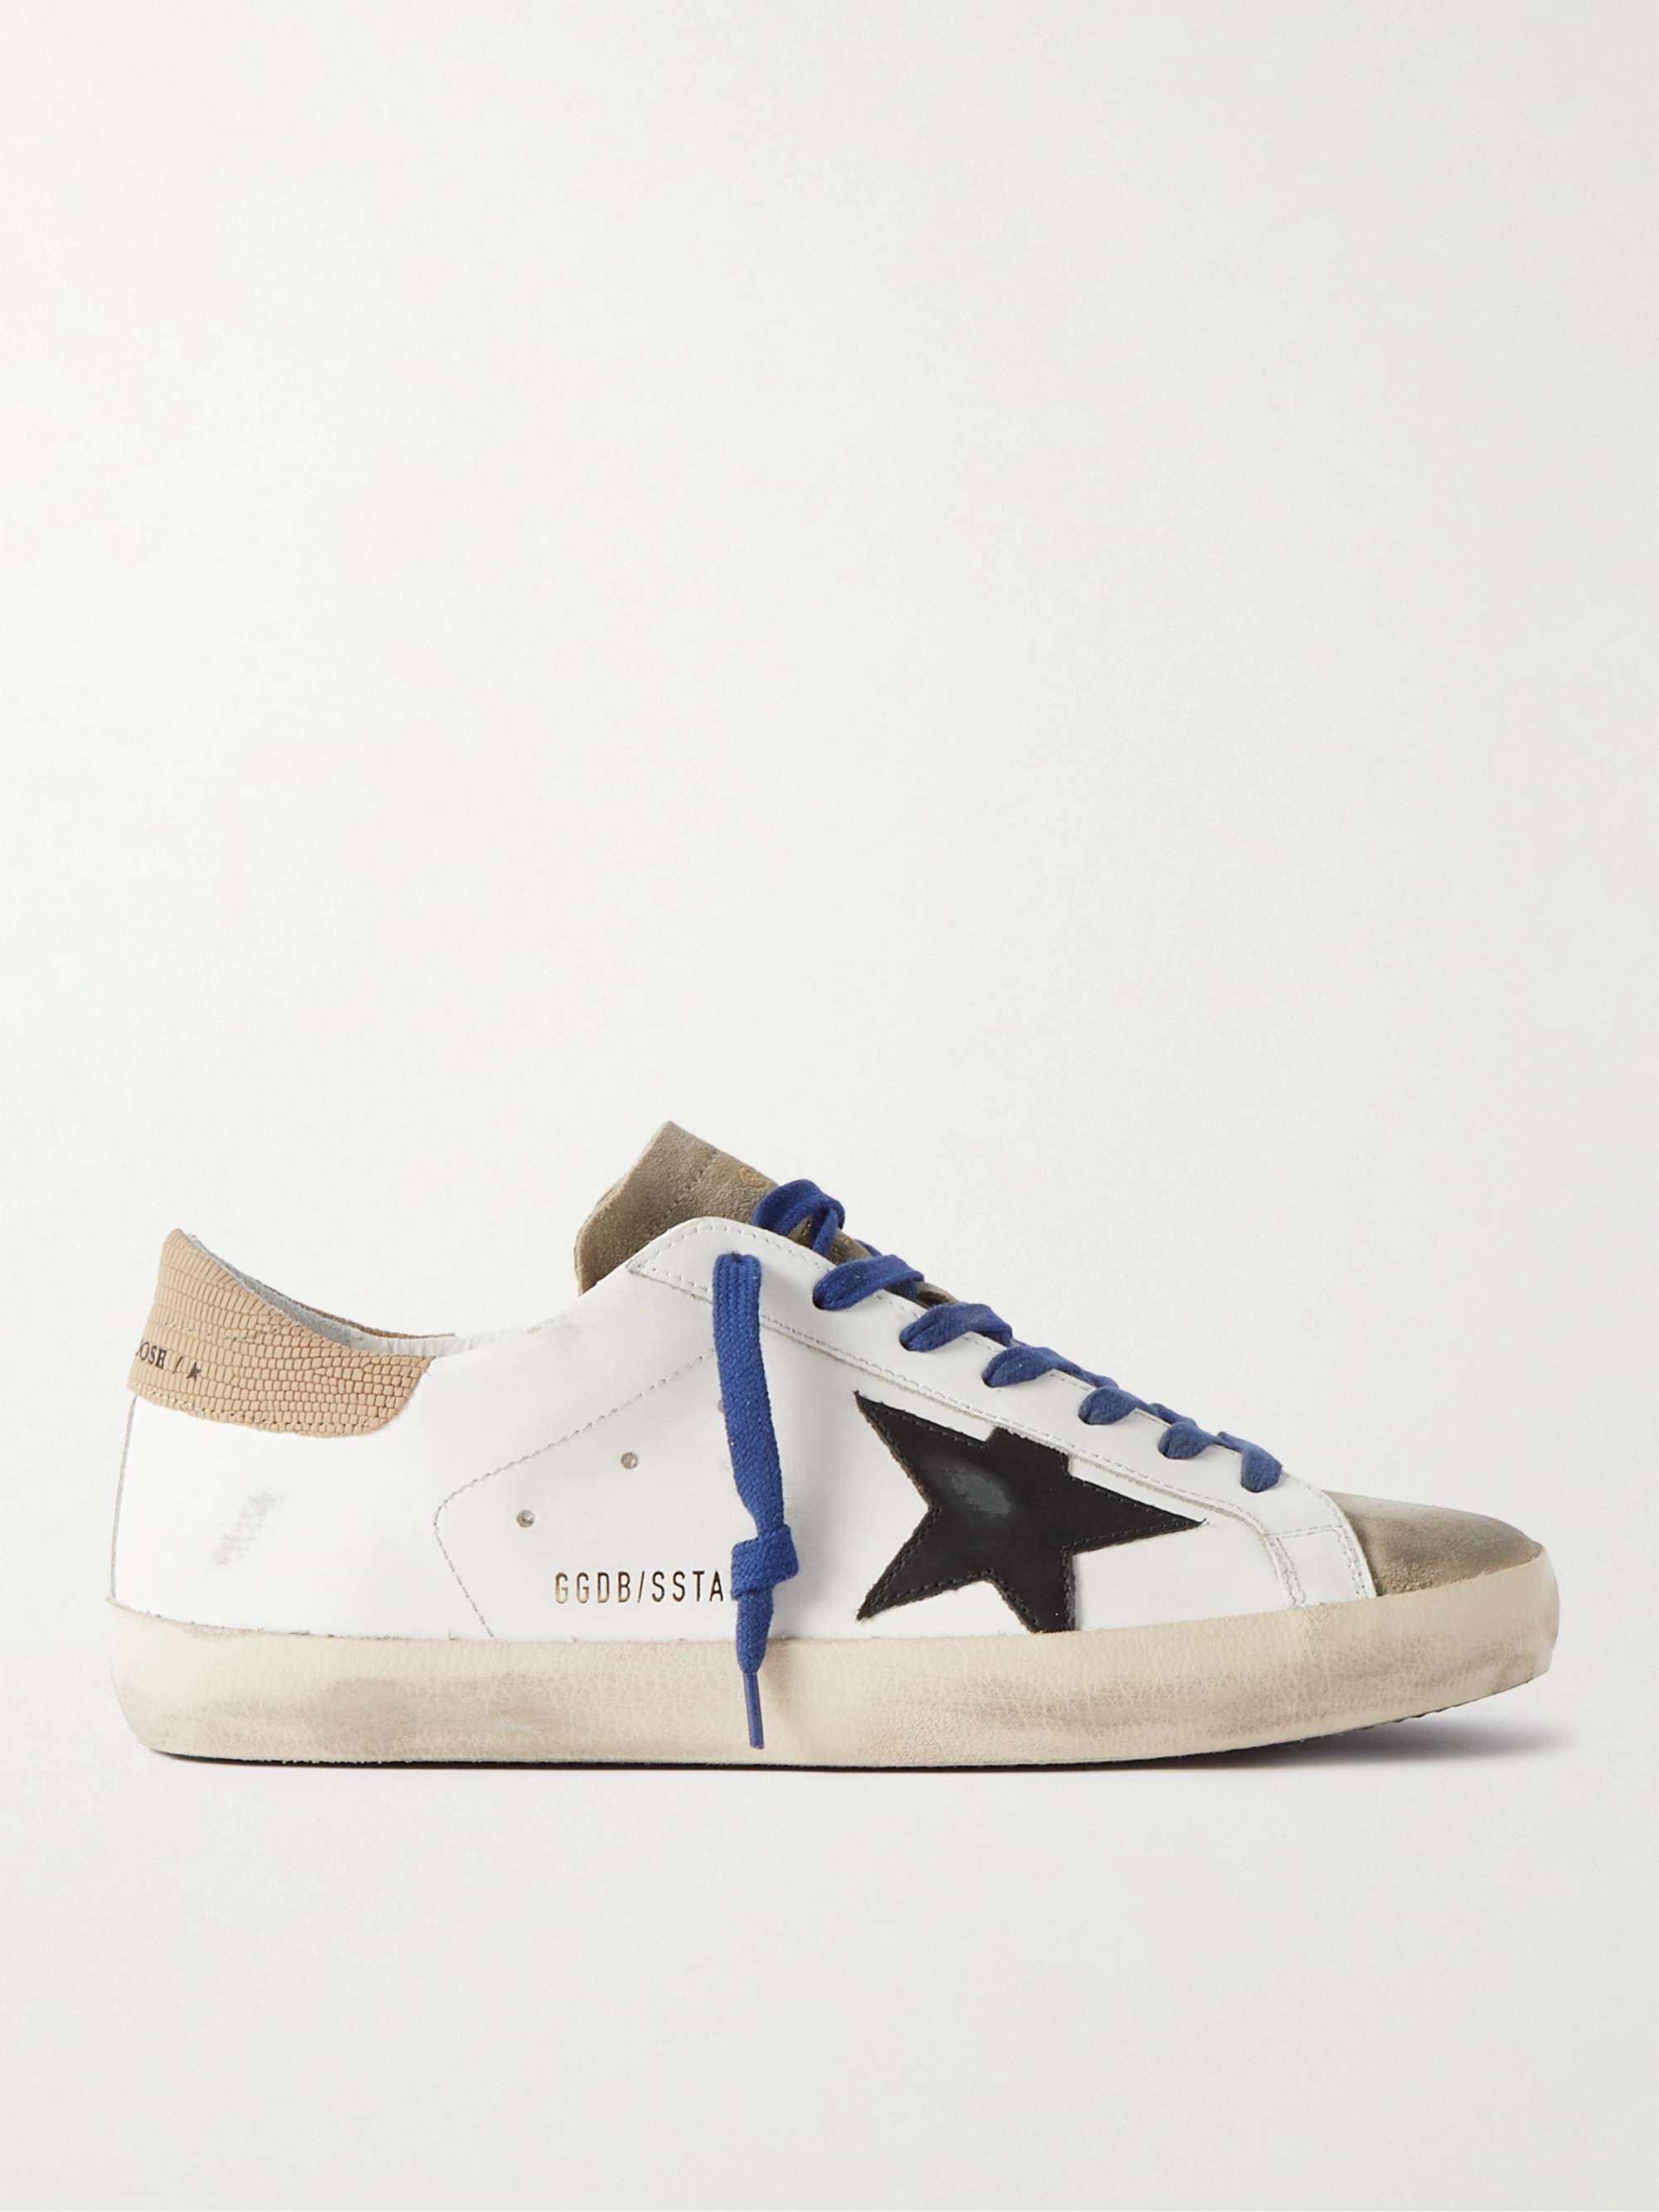 GOLDEN GOOSE Superstar Distressed Leather and Suede Sneakers | MR PORTER